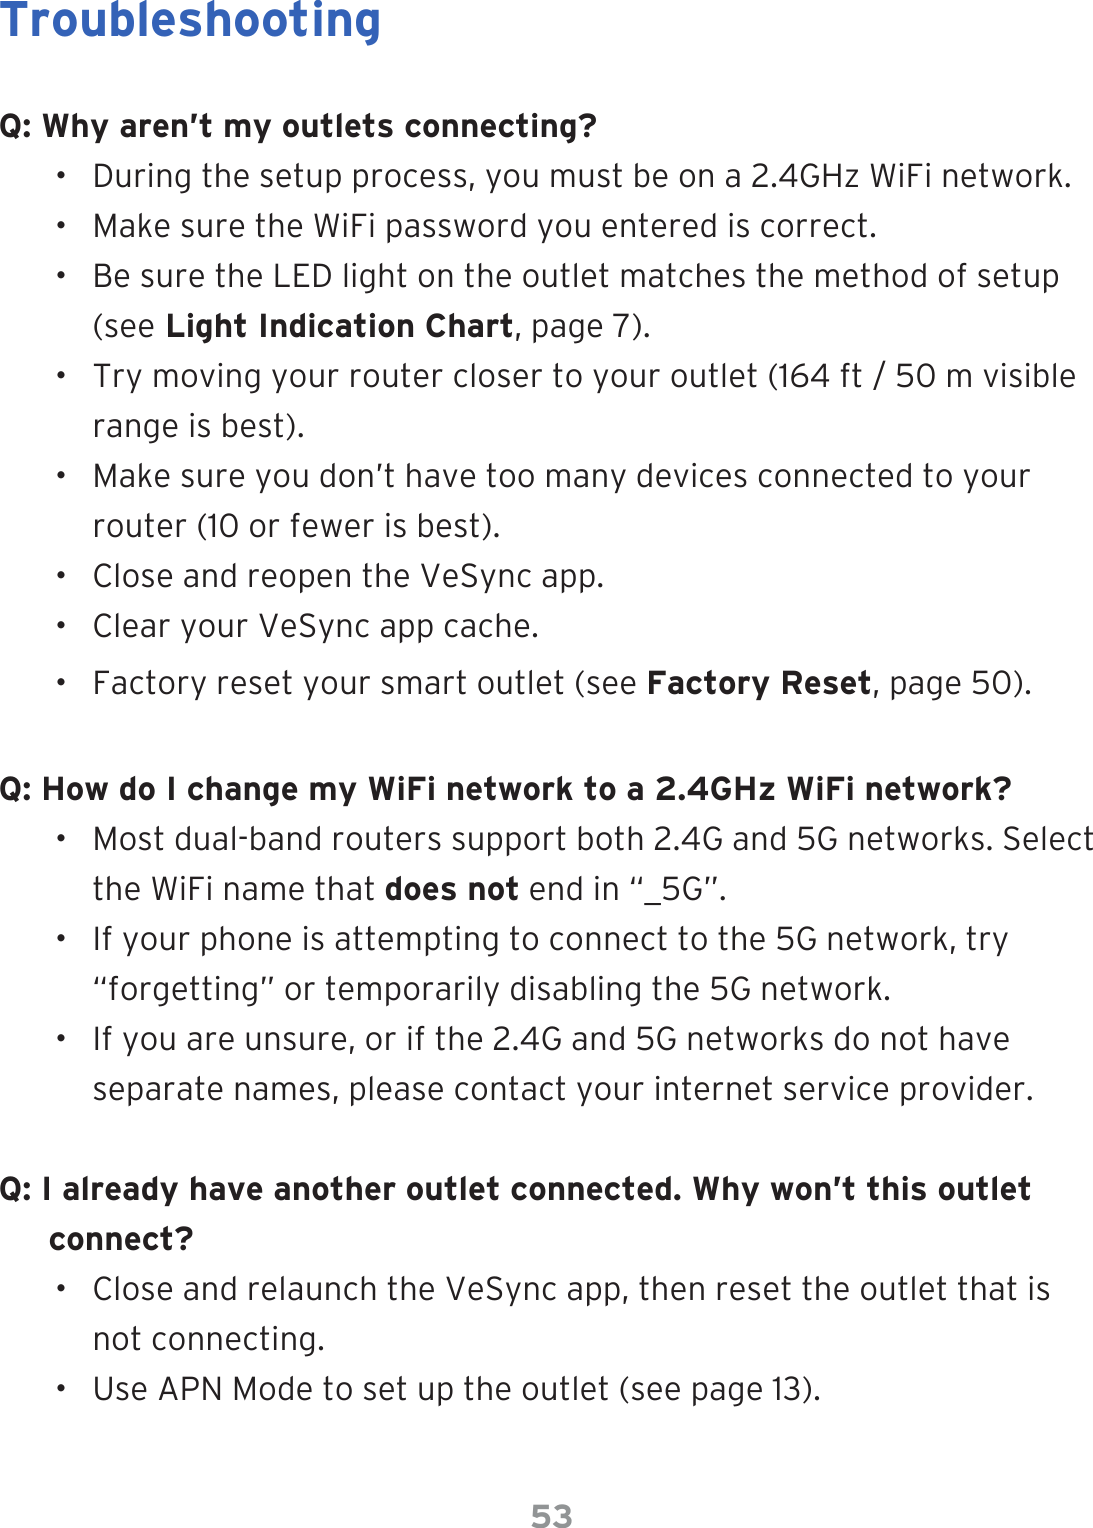 53TroubleshootingQ: Why aren’t my outlets connecting?•  During the setup process, you must be on a 2.4GHz WiFi network.•  Make sure the WiFi password you entered is correct.•  Be sure the LED light on the outlet matches the method of setup (see Light Indication Chart, page 7).•  Try moving your router closer to your outlet (164 ft / 50 m visible range is best).•  Make sure you don’t have too many devices connected to your router (10 or fewer is best).•  Close and reopen the VeSync app.•  Clear your VeSync app cache. •  Factory reset your smart outlet (see Factory Reset, page 50).Q: How do I change my WiFi network to a 2.4GHz WiFi network?•  Most dual-band routers support both 2.4G and 5G networks. Select the WiFi name that does not end in “_5G”.•  If your phone is attempting to connect to the 5G network, try “forgetting” or temporarily disabling the 5G network.•  If you are unsure, or if the 2.4G and 5G networks do not have separate names, please contact your internet service provider.Q: I already have another outlet connected. Why won’t this outlet connect?•  Close and relaunch the VeSync app, then reset the outlet that is not connecting.•  Use APN Mode to set up the outlet (see page 13).